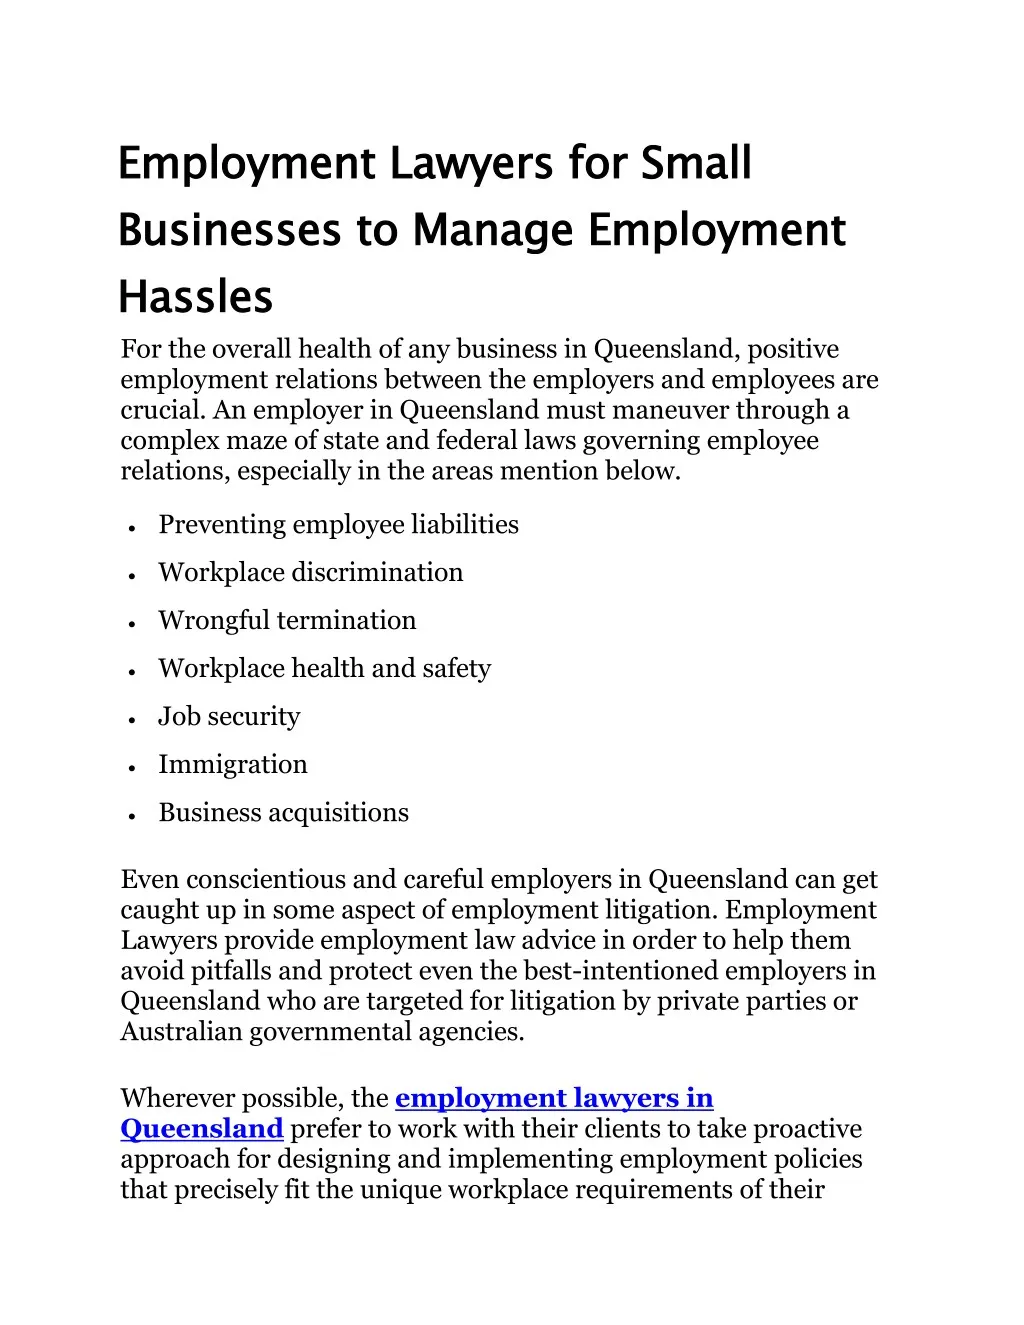 employment lawyers for small businesses to manage